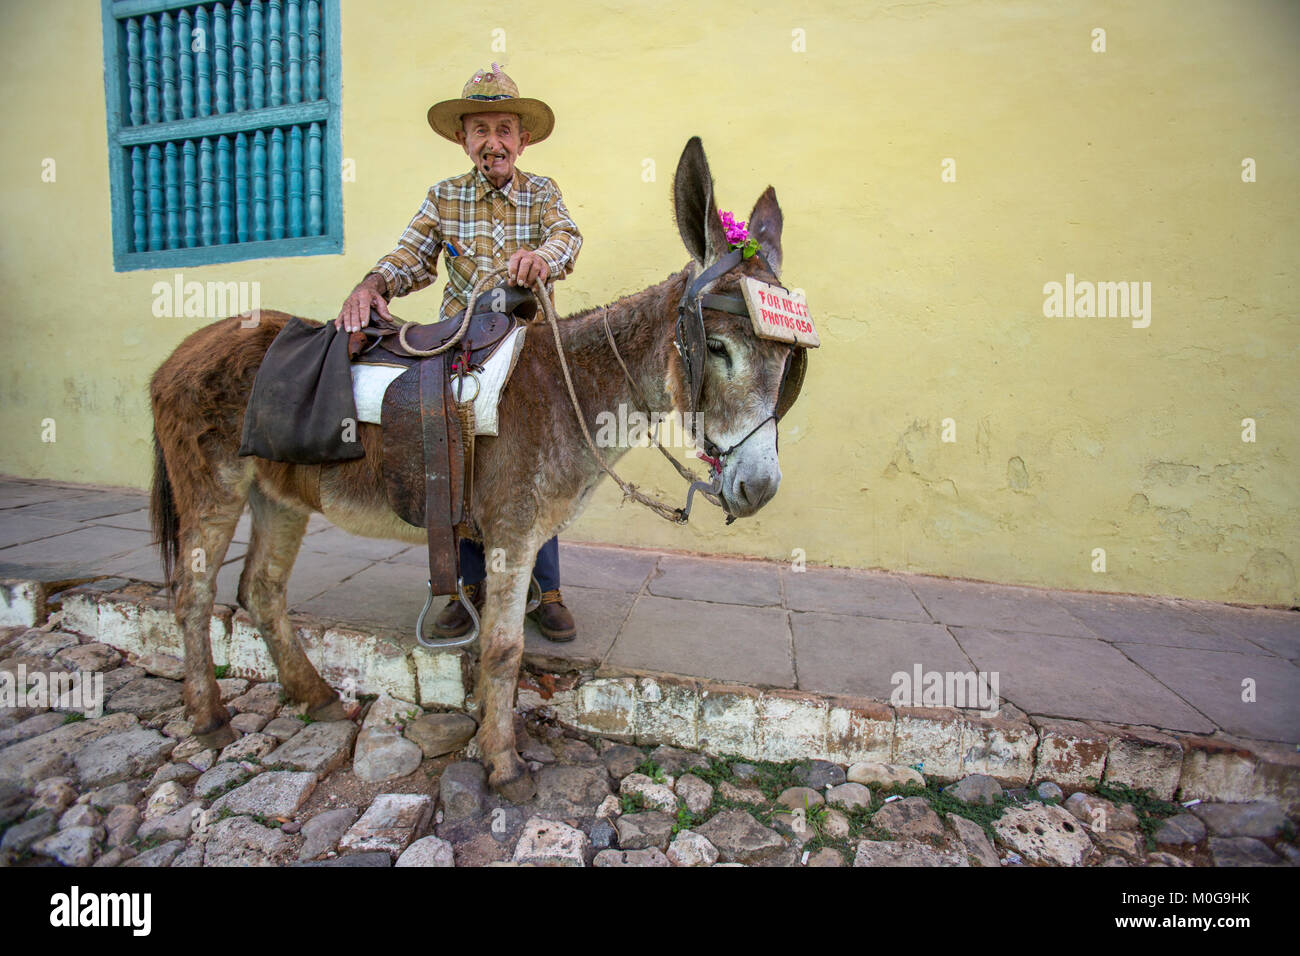 Old man and his donkey for rent in Trinidad, Cuba Stock Photo